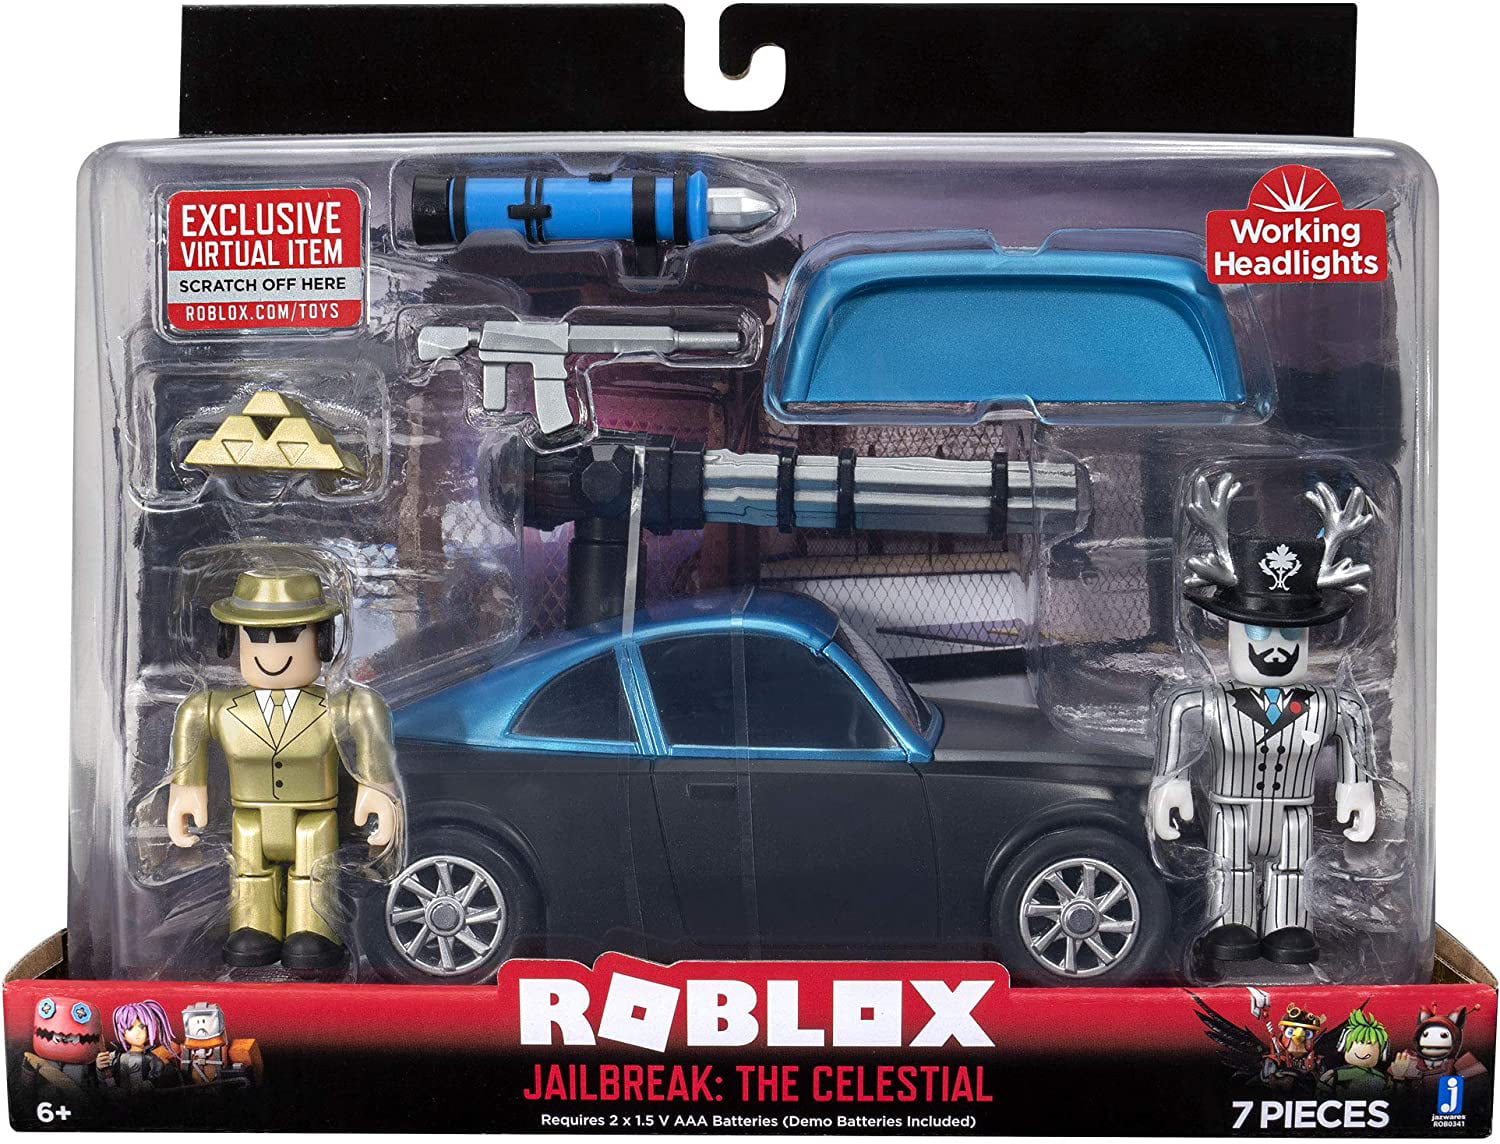 Roblox Action Collection Jailbreak The Celestial Deluxe Vehicle Includes Exclusive Virtual Item Walmart Com Walmart Com - roblox toys jailbreak